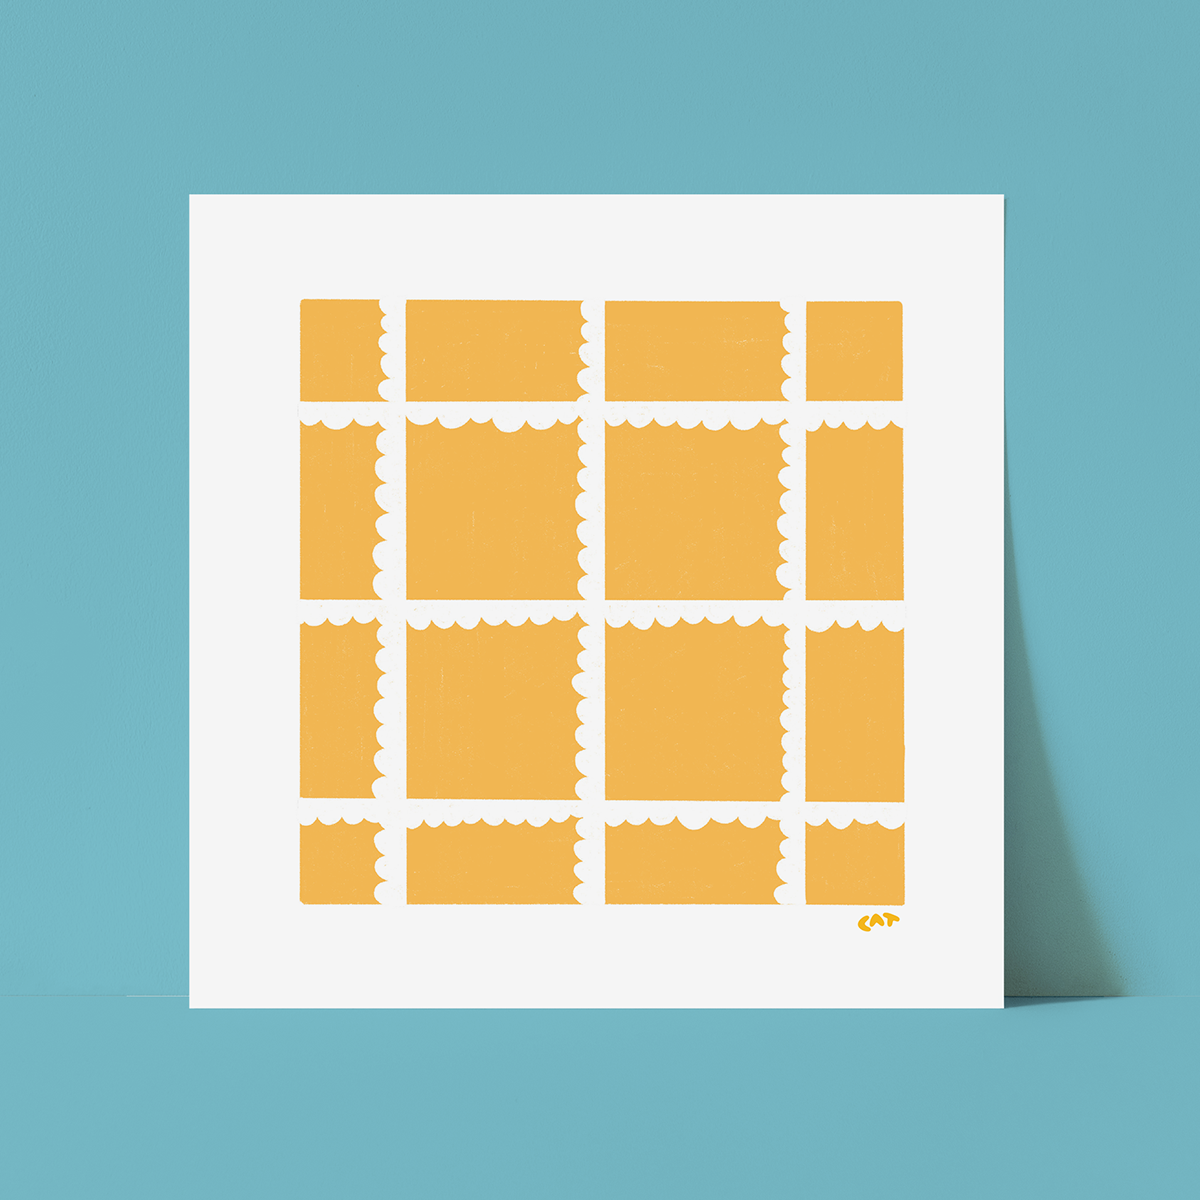 White unframed print of a yellow square with white ruffles laid out in a grid composition.